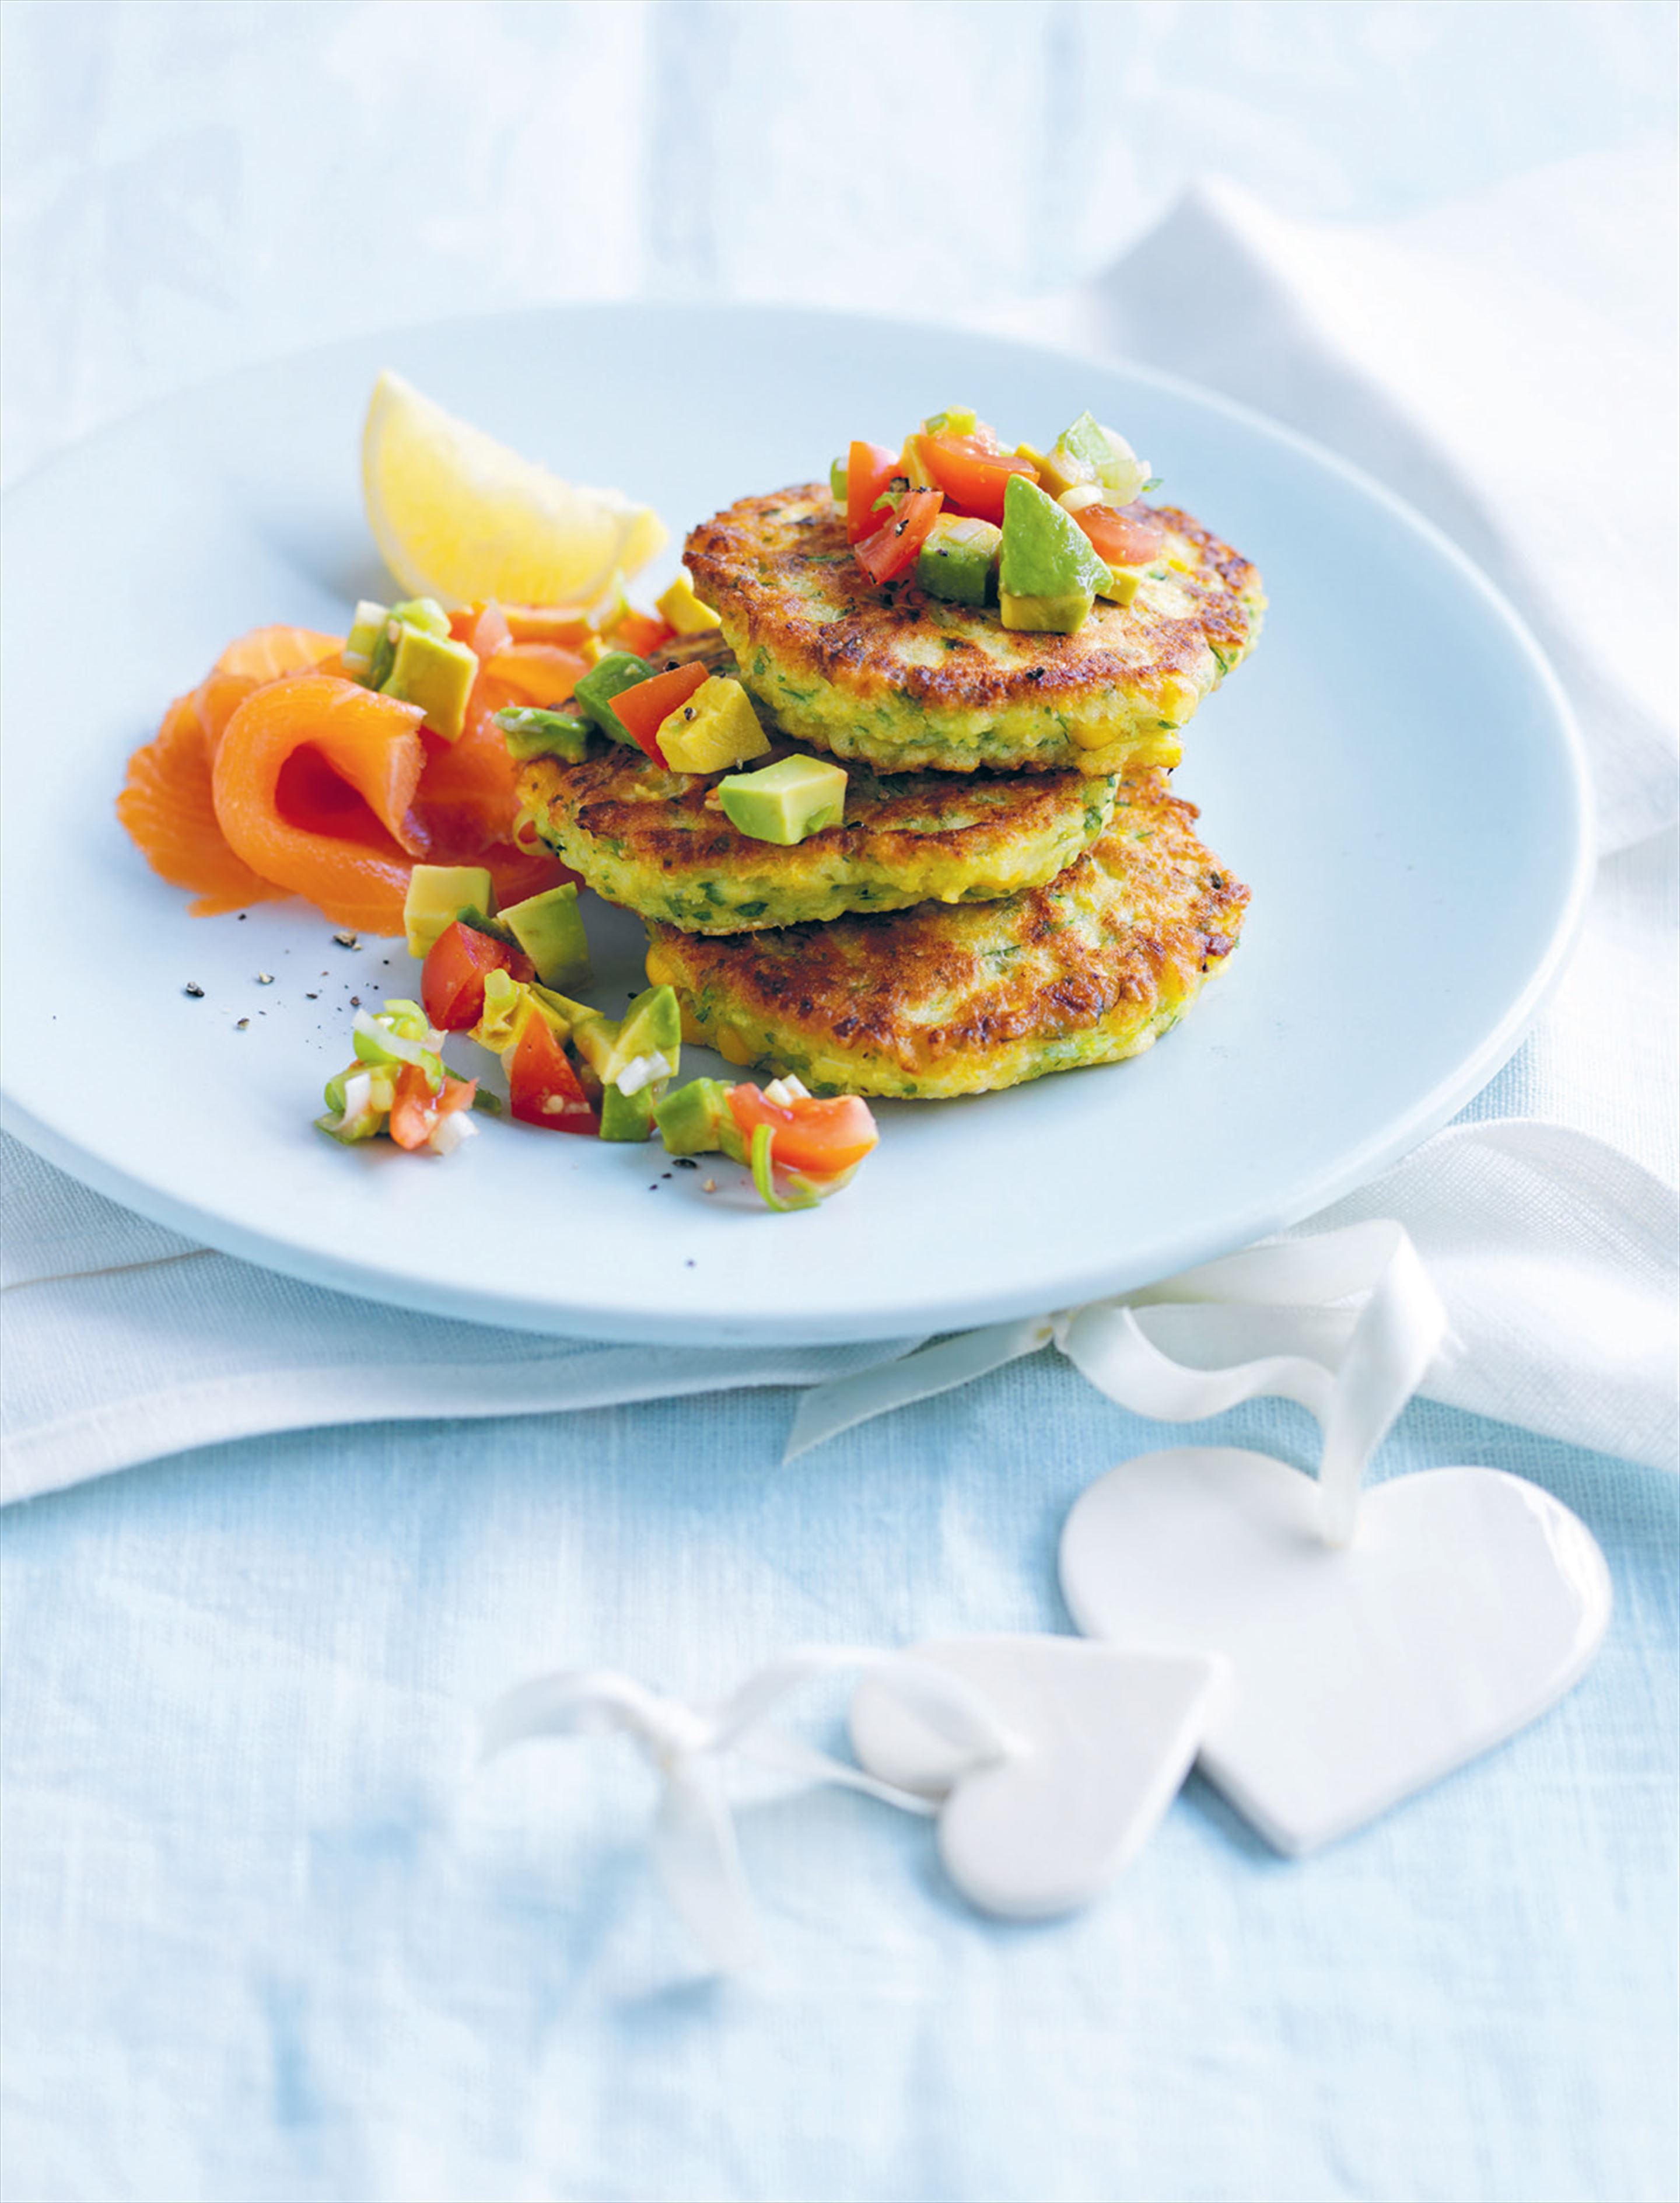 Sweetcorn fritters with smoked salmon